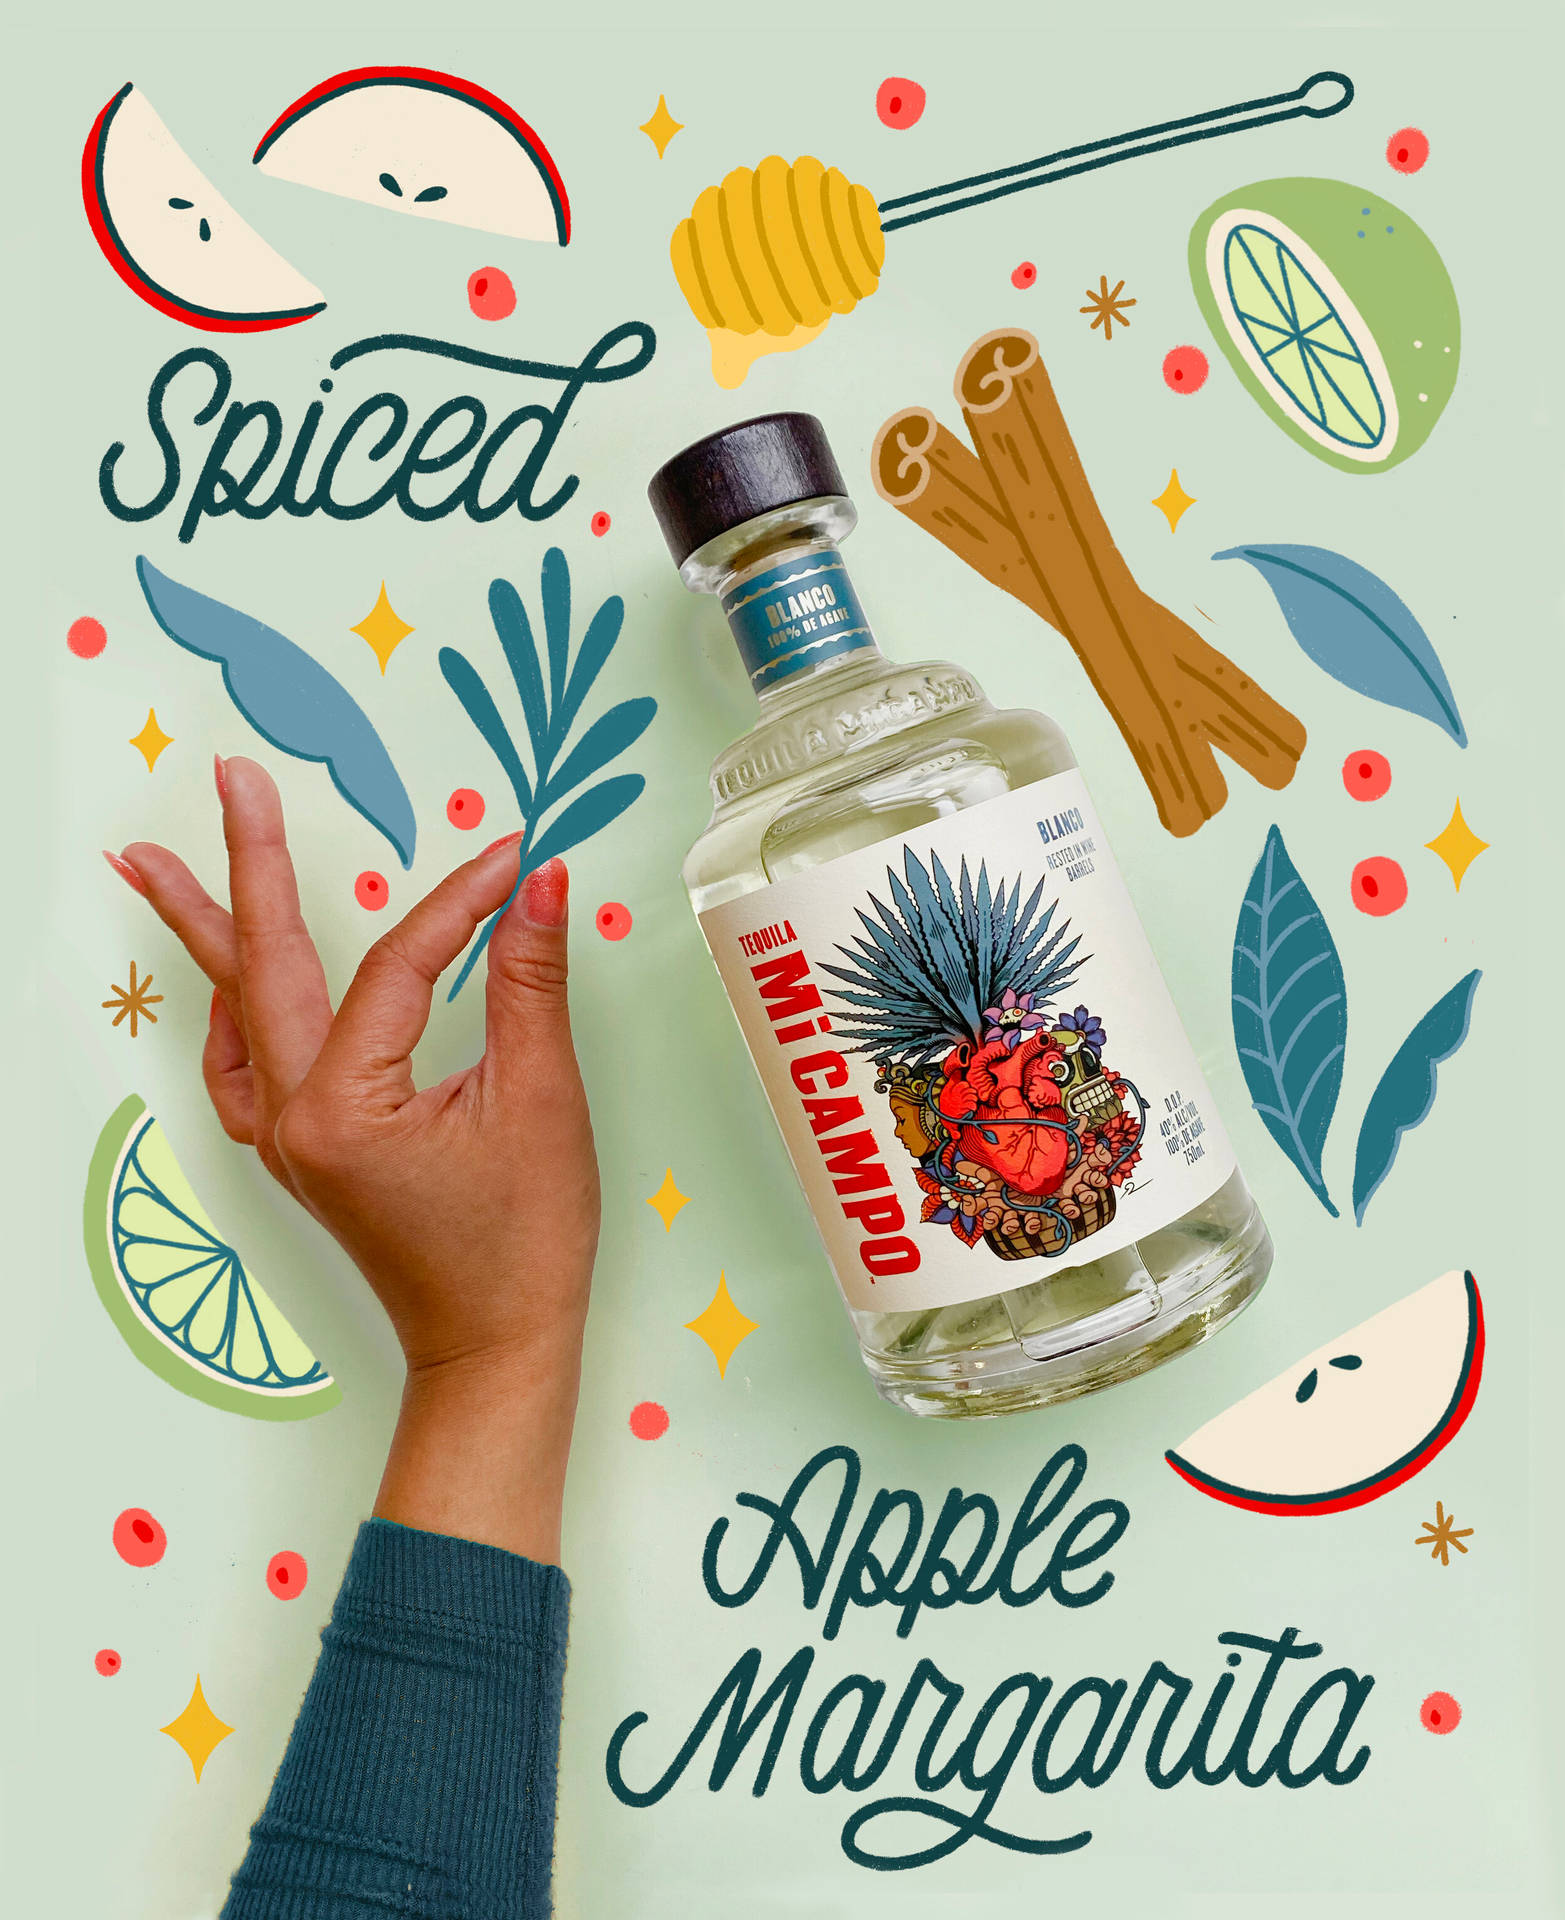 Micampo Tequila Spiced Apple Margarita Wallpaper